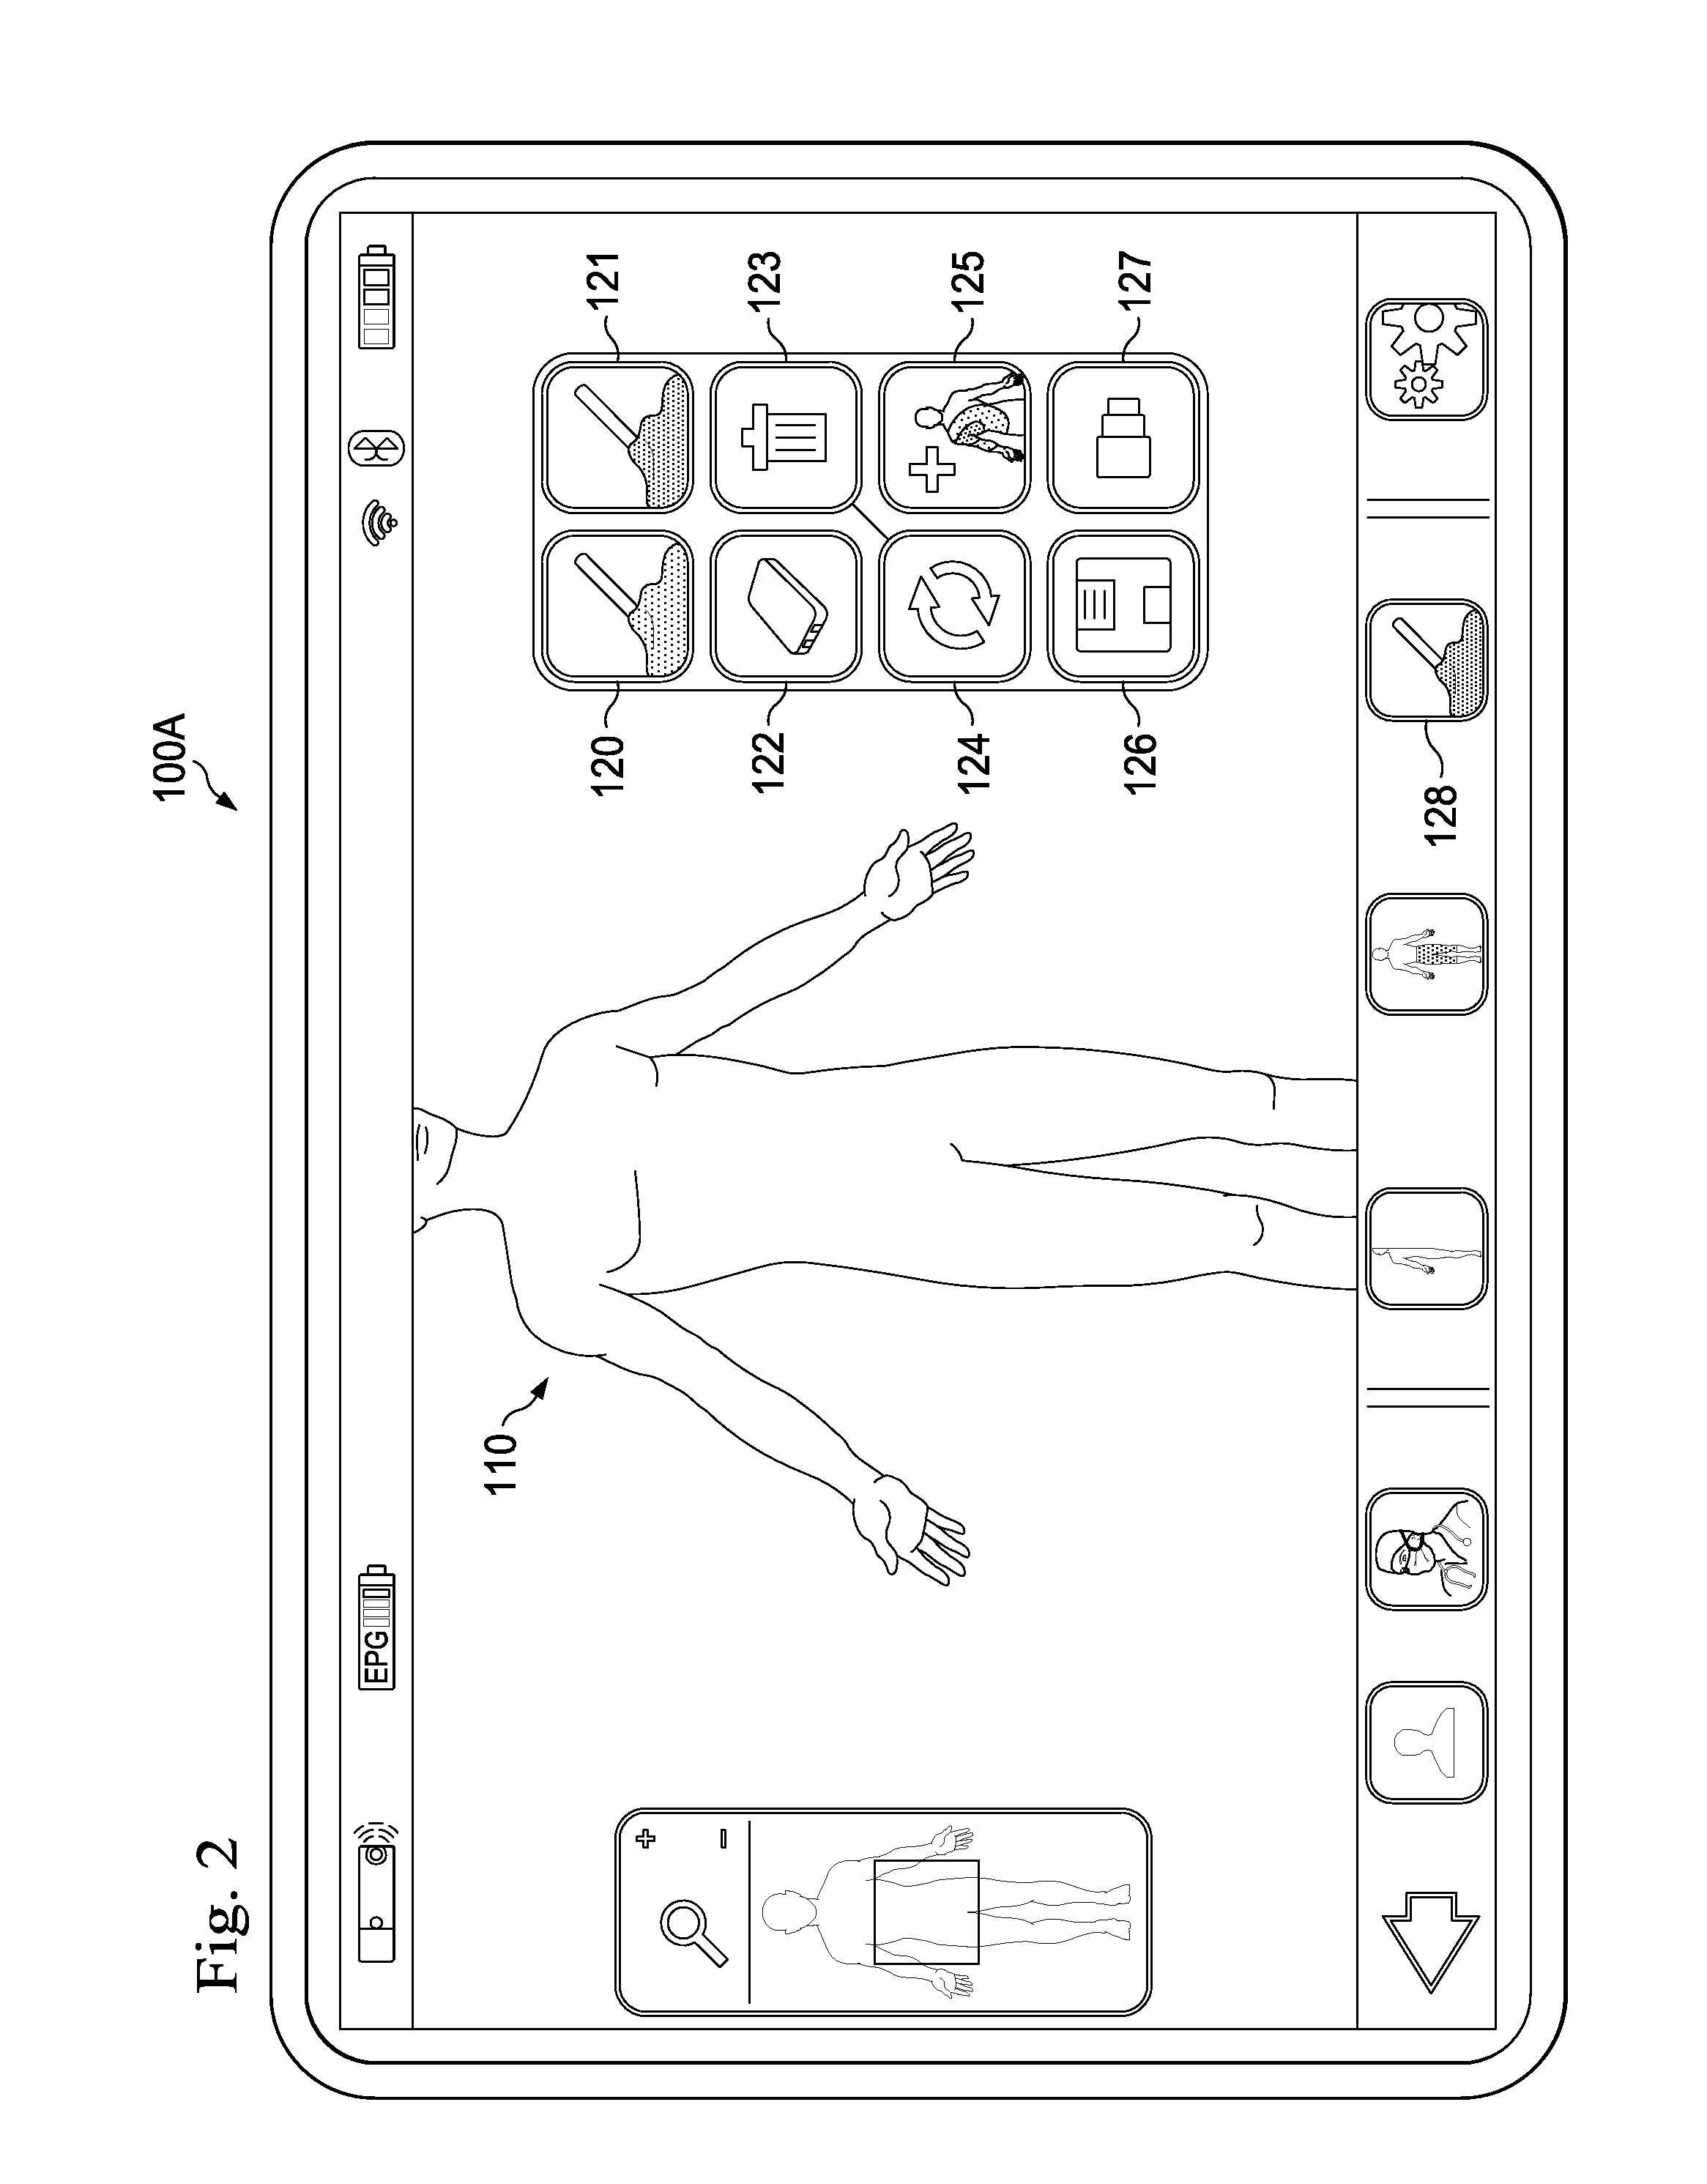 System and Method of Compressing Medical Maps for Pulse Generator or Database Storage